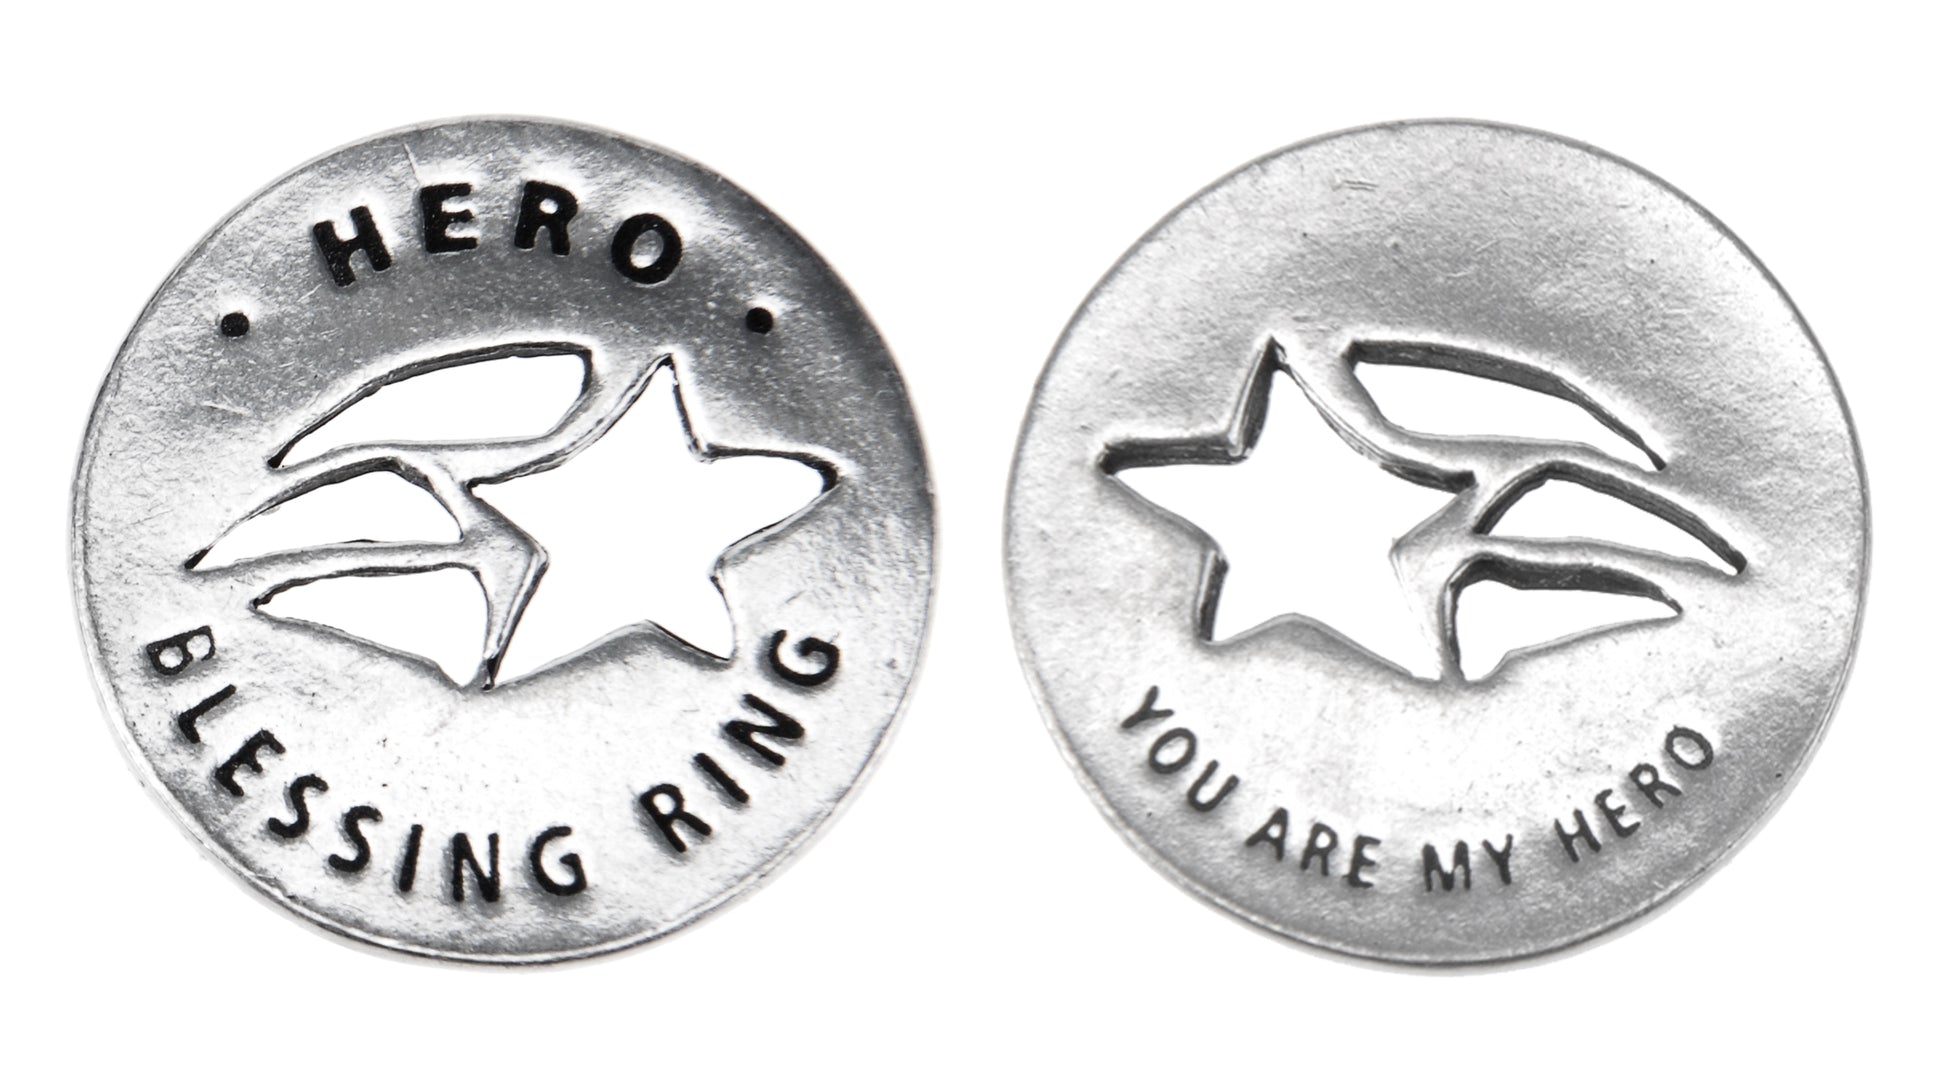 Hero Blessing Ring front and back (on back - you are my hero)